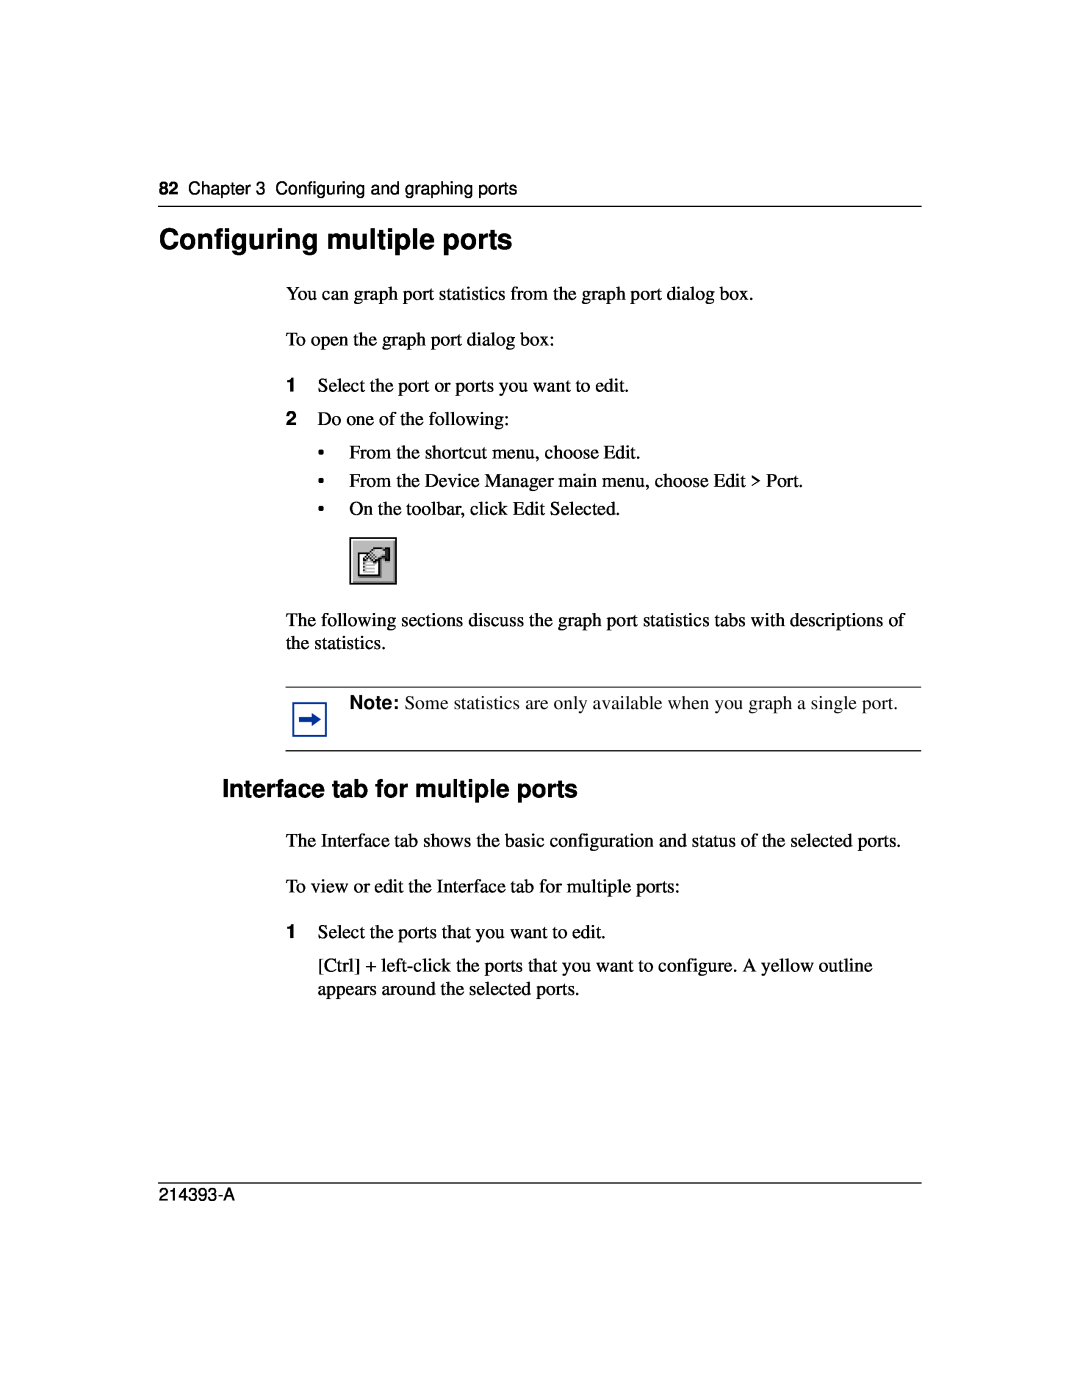 Nortel Networks 214393-A manual Configuring multiple ports, Interface tab for multiple ports 